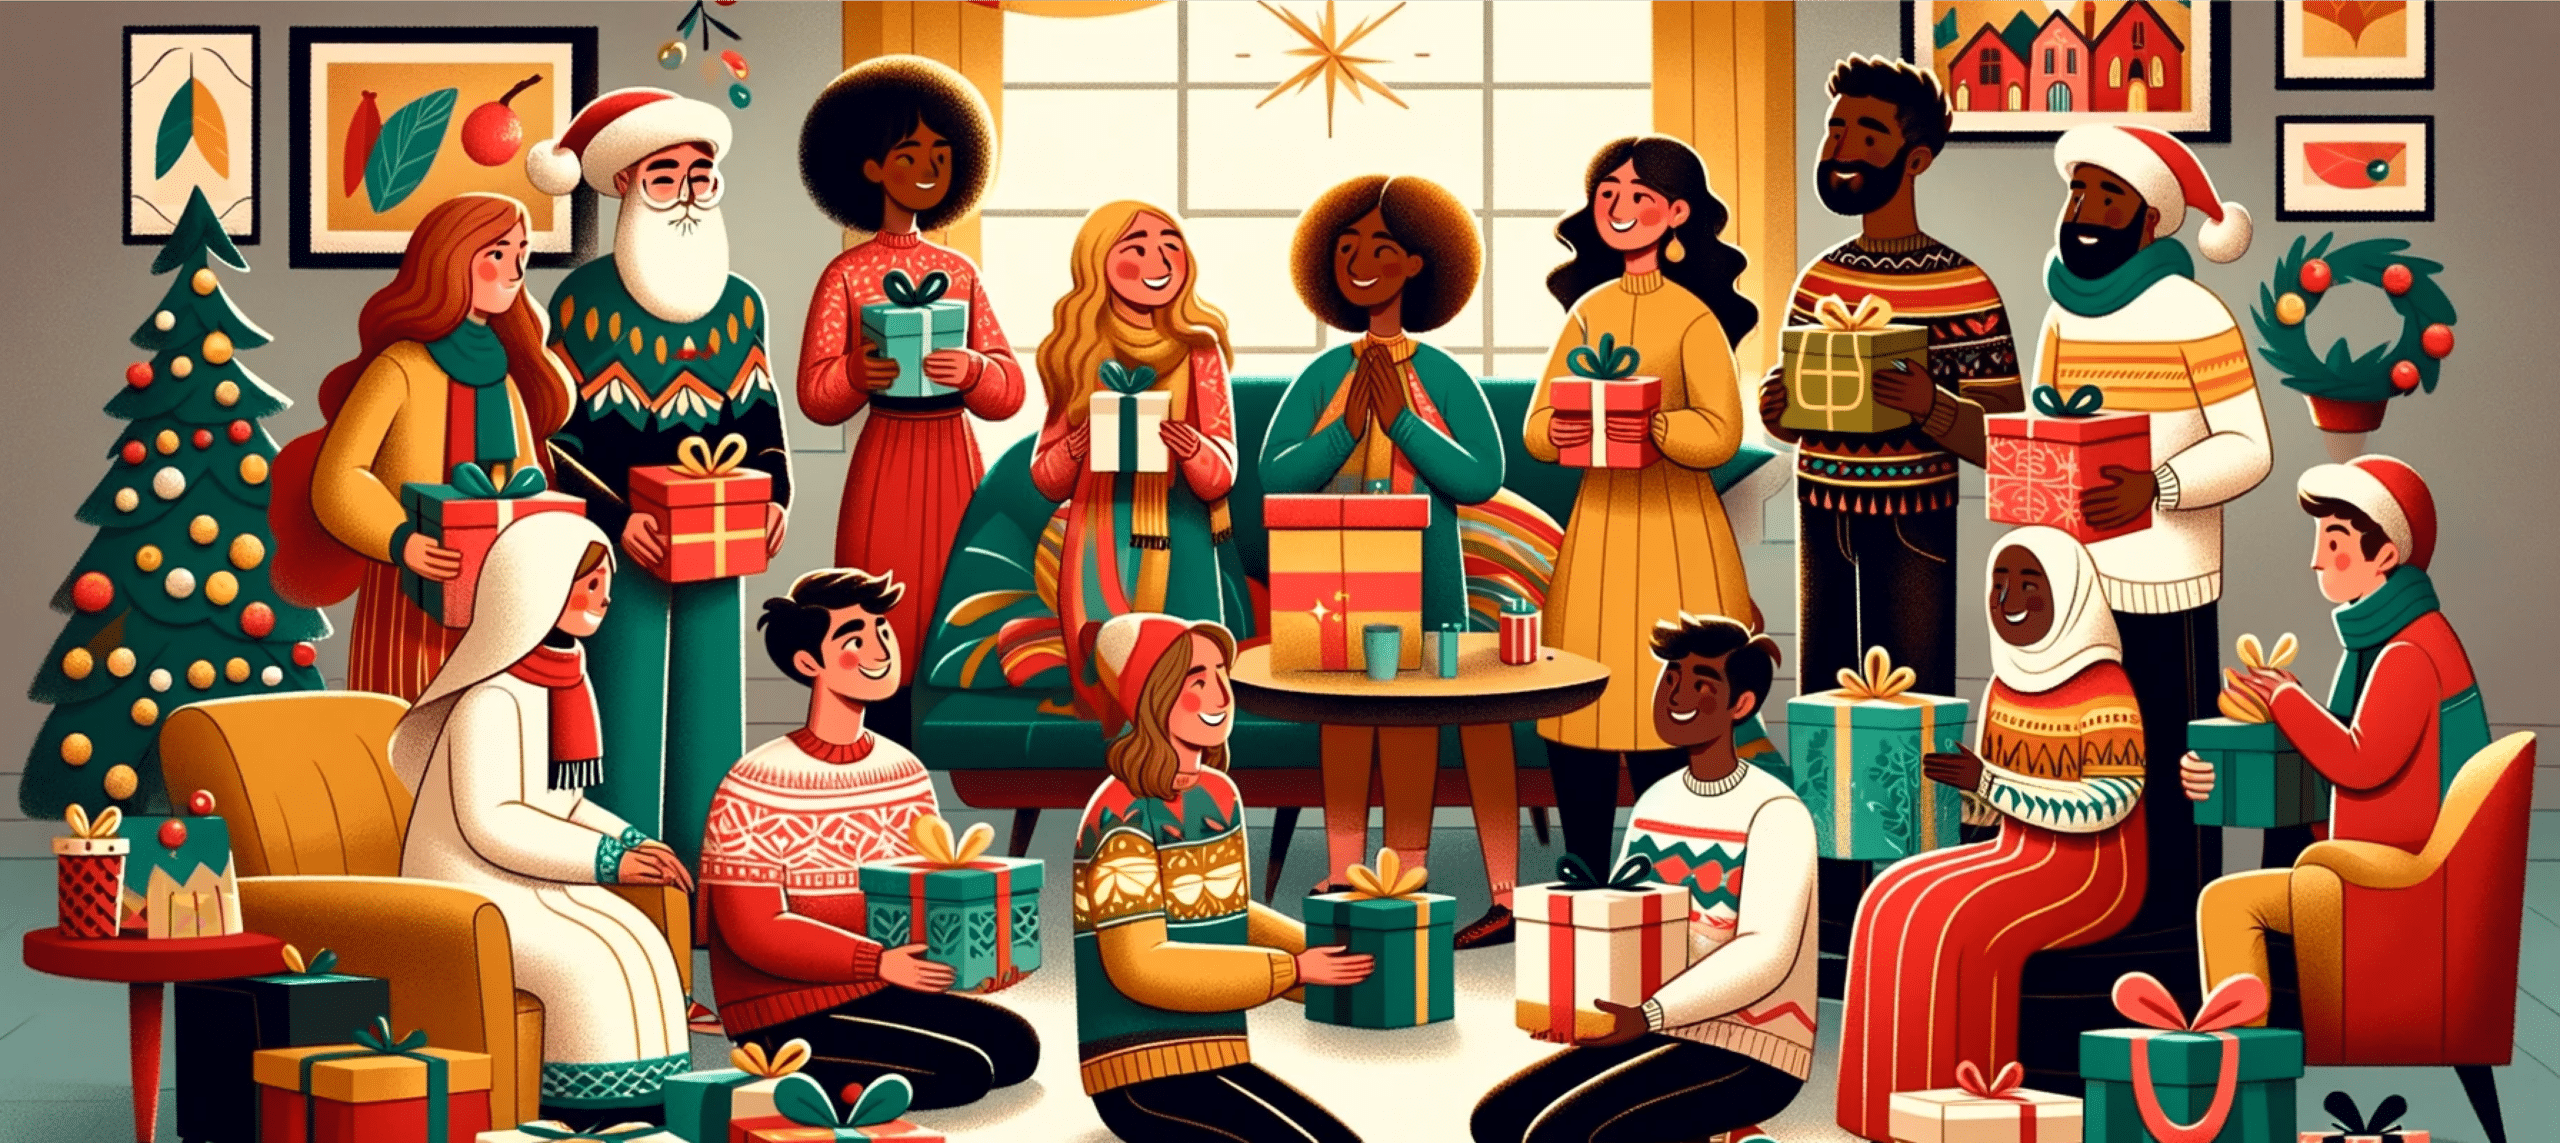 Diverse Christmas celebration illustrated with a vibrant and cheerful group of individuals from various ethnicities. They are exchanging gifts and wearing festive attire, surrounded by traditional holiday decorations, including a richly decorated Christmas tree, wreaths, and seasonal wall art. This inclusive holiday gathering image captures the essence of the Christmas spirit, perfect for festive content and diverse representation during the holiday season